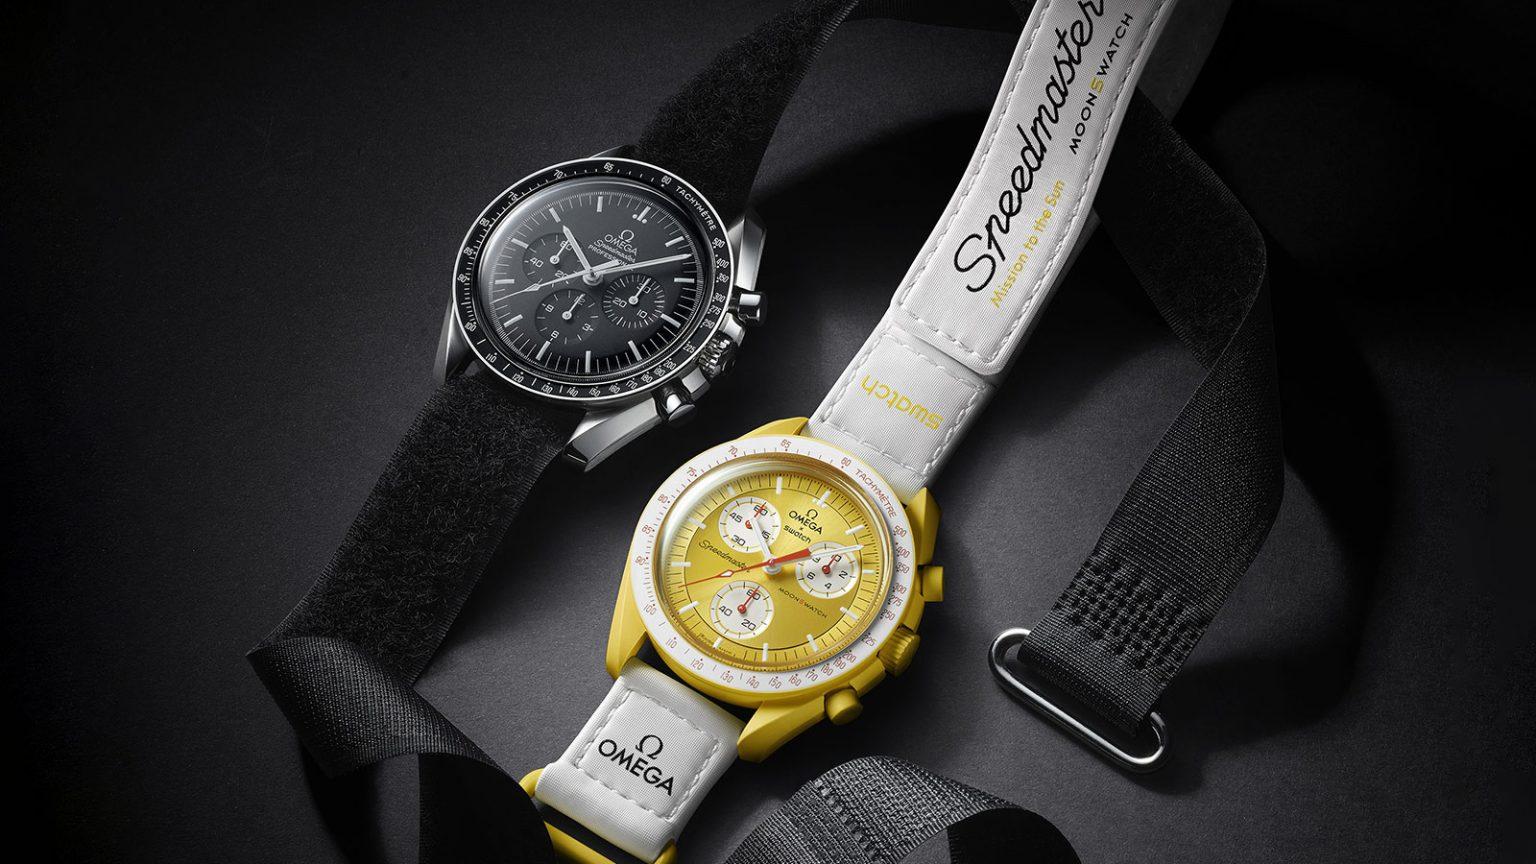 The New Launch of Omega Swatch Collaboration Sparks Shopping Frenzy